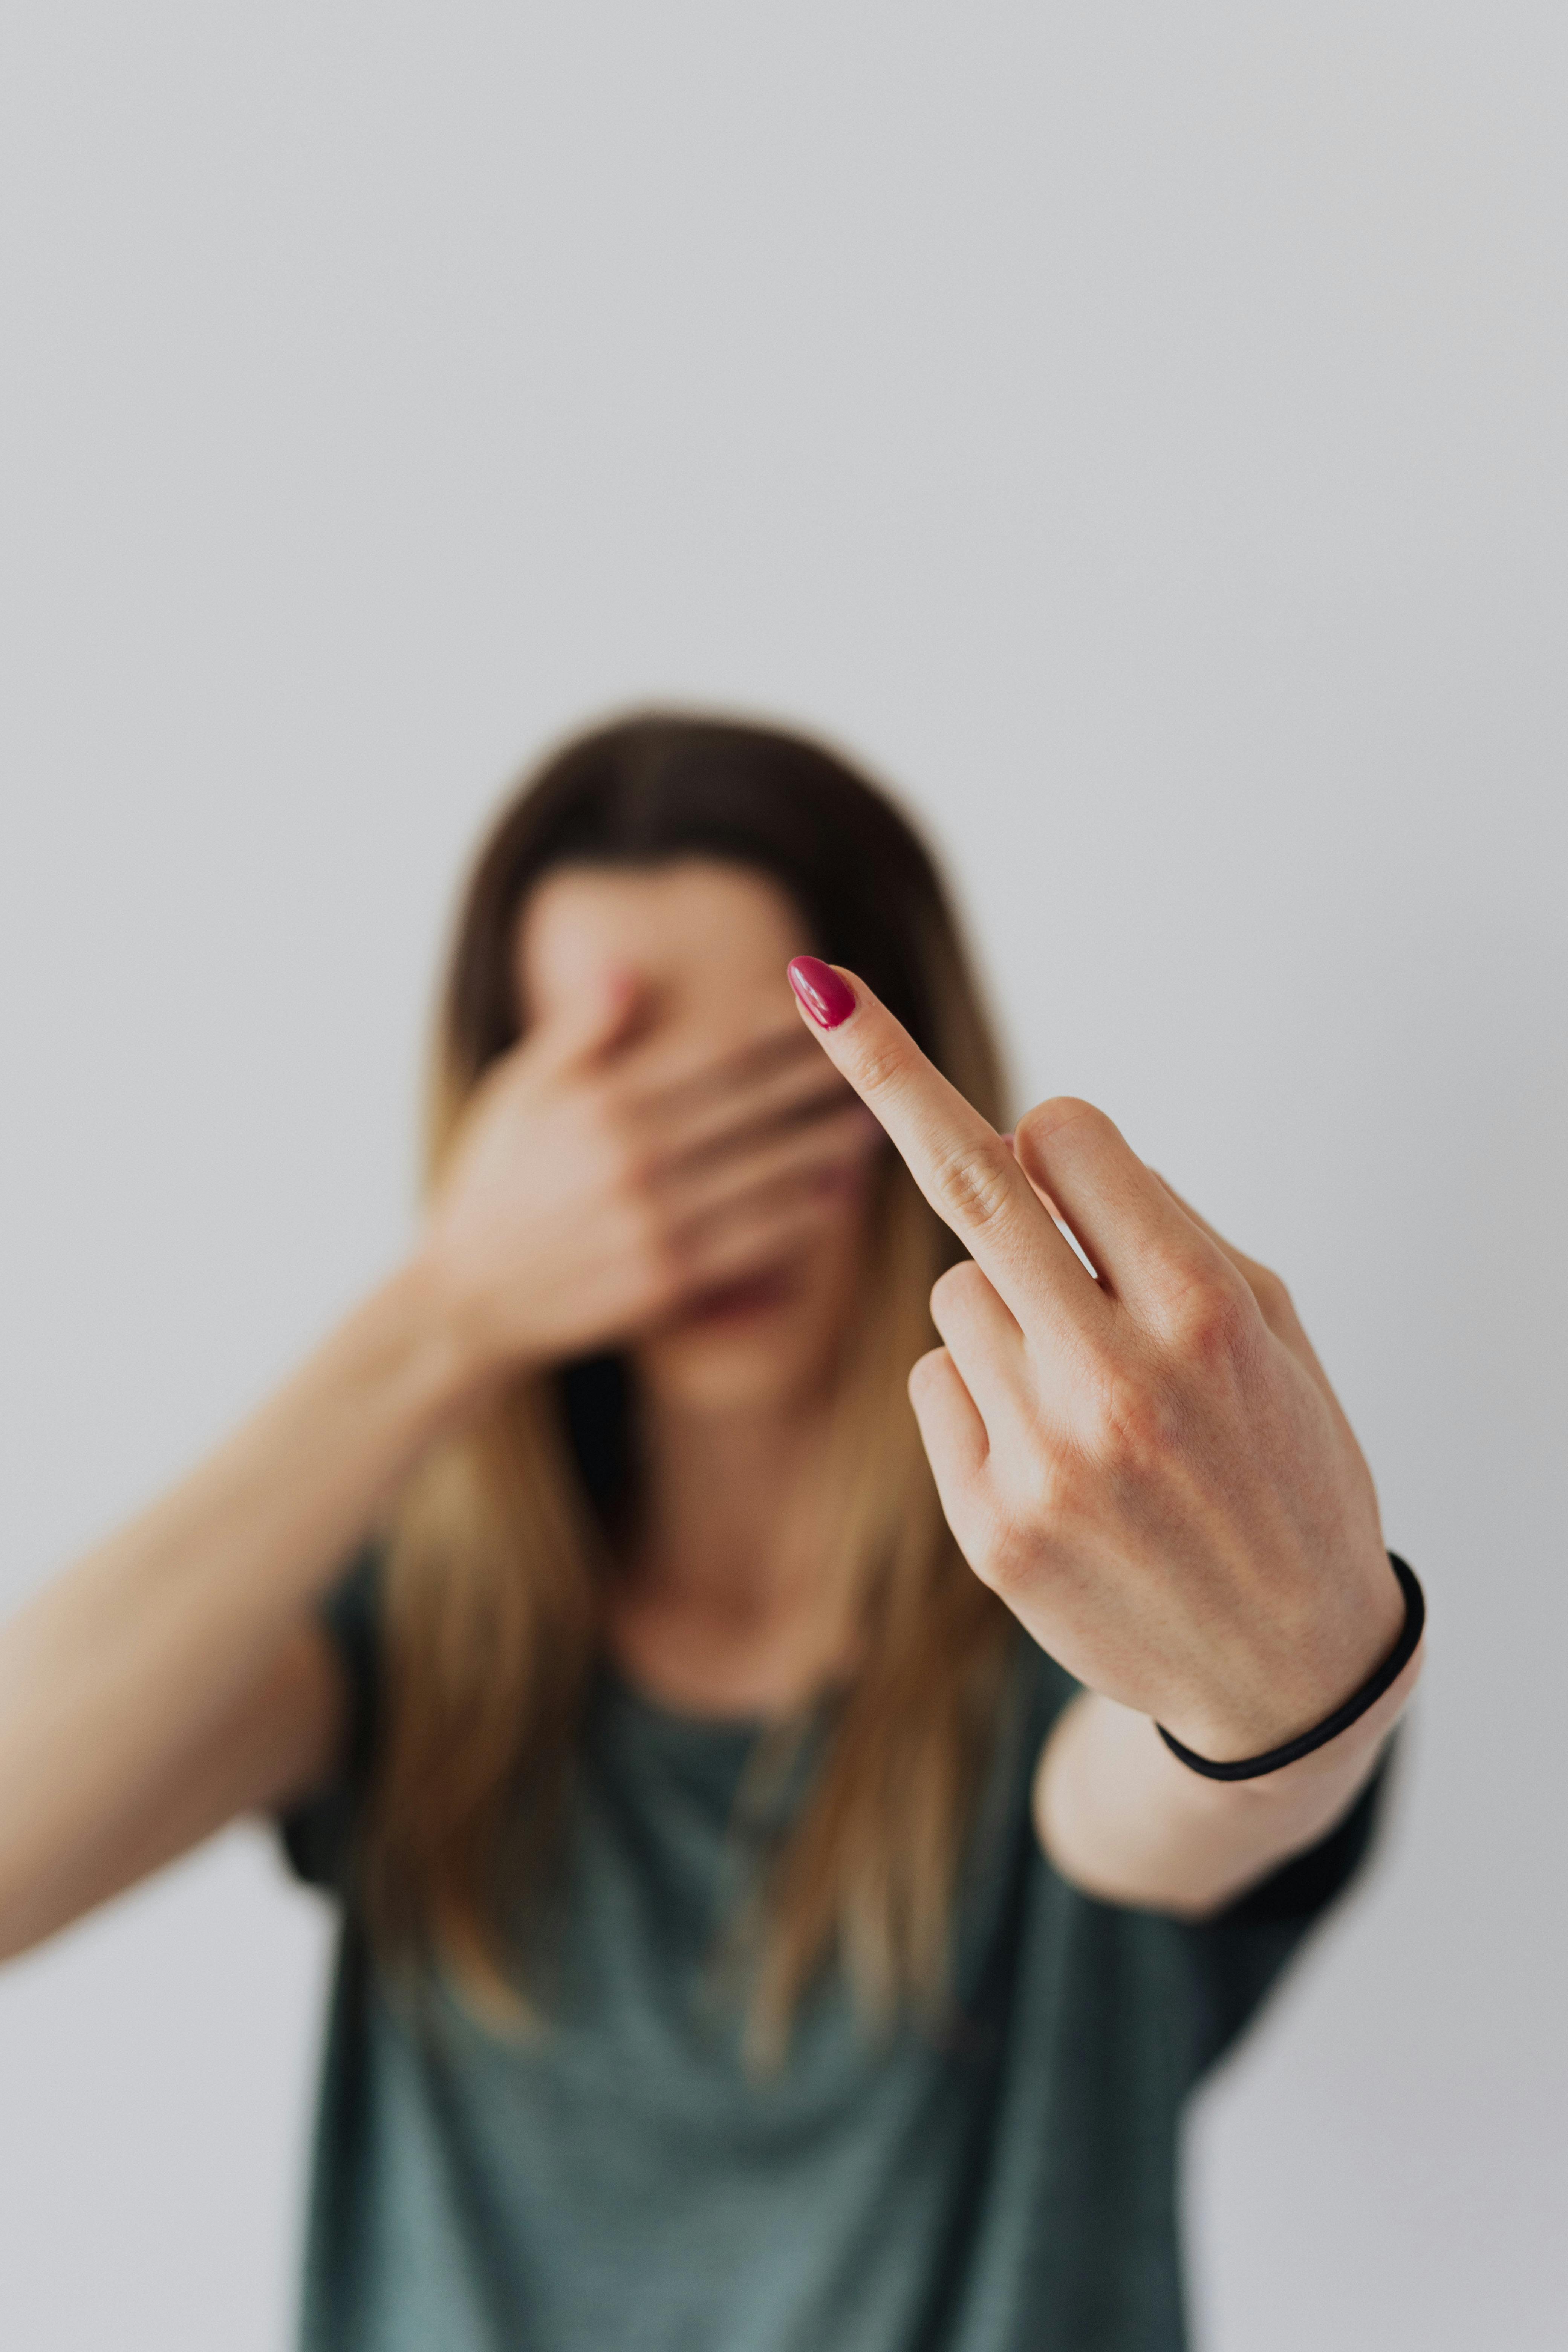 56 Girl Middle Finger Stock Videos, Footage, & 4K Video Clips - Getty Images